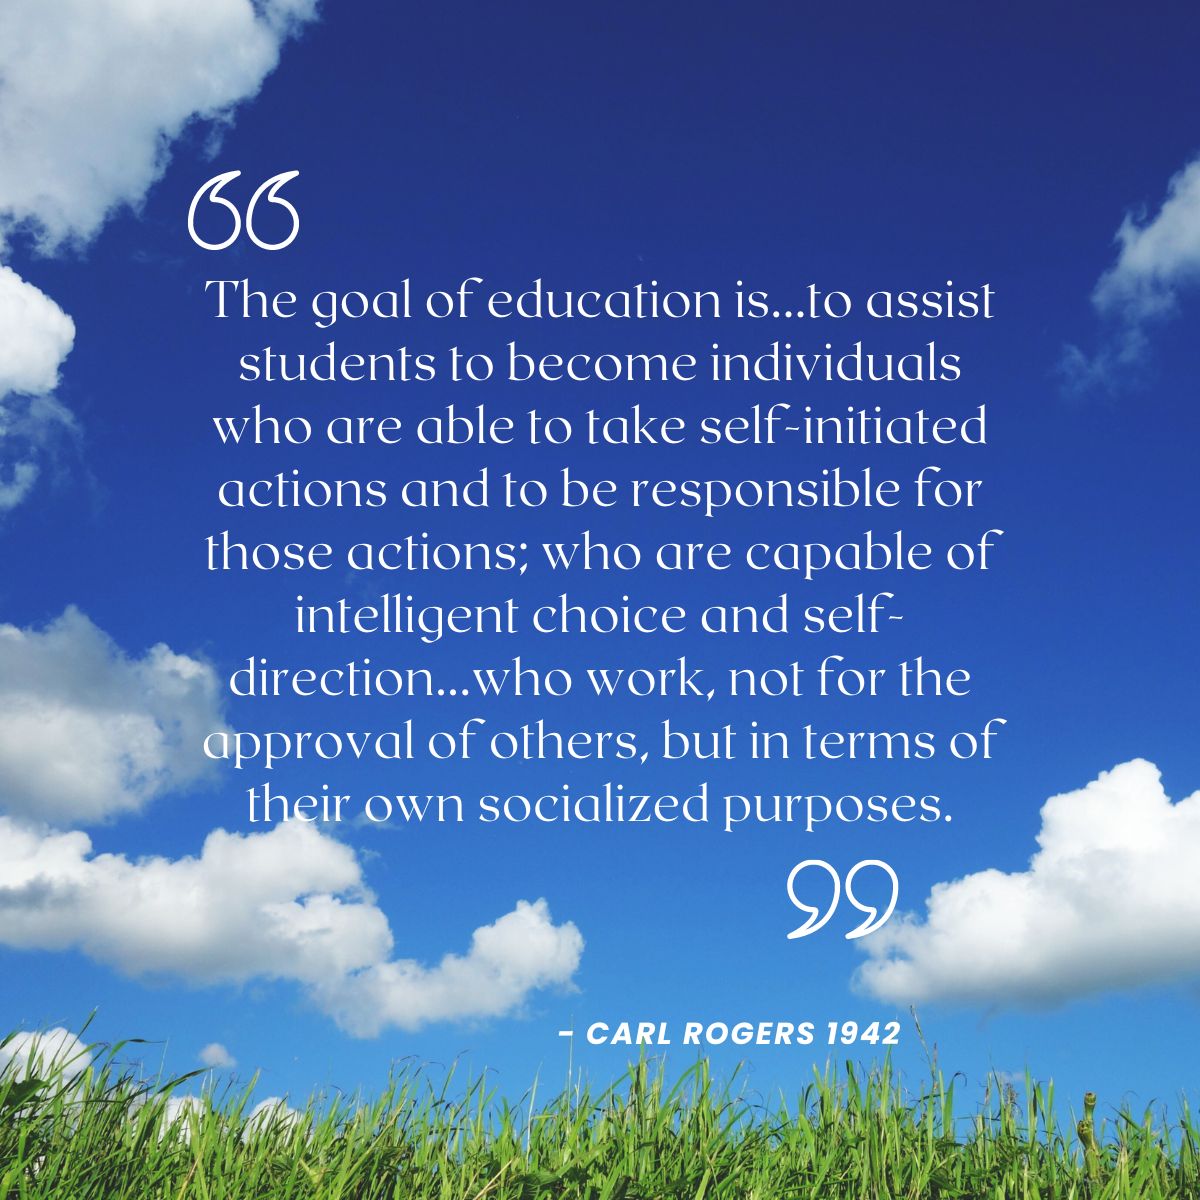 Carl Rogers Goal of Education Quote